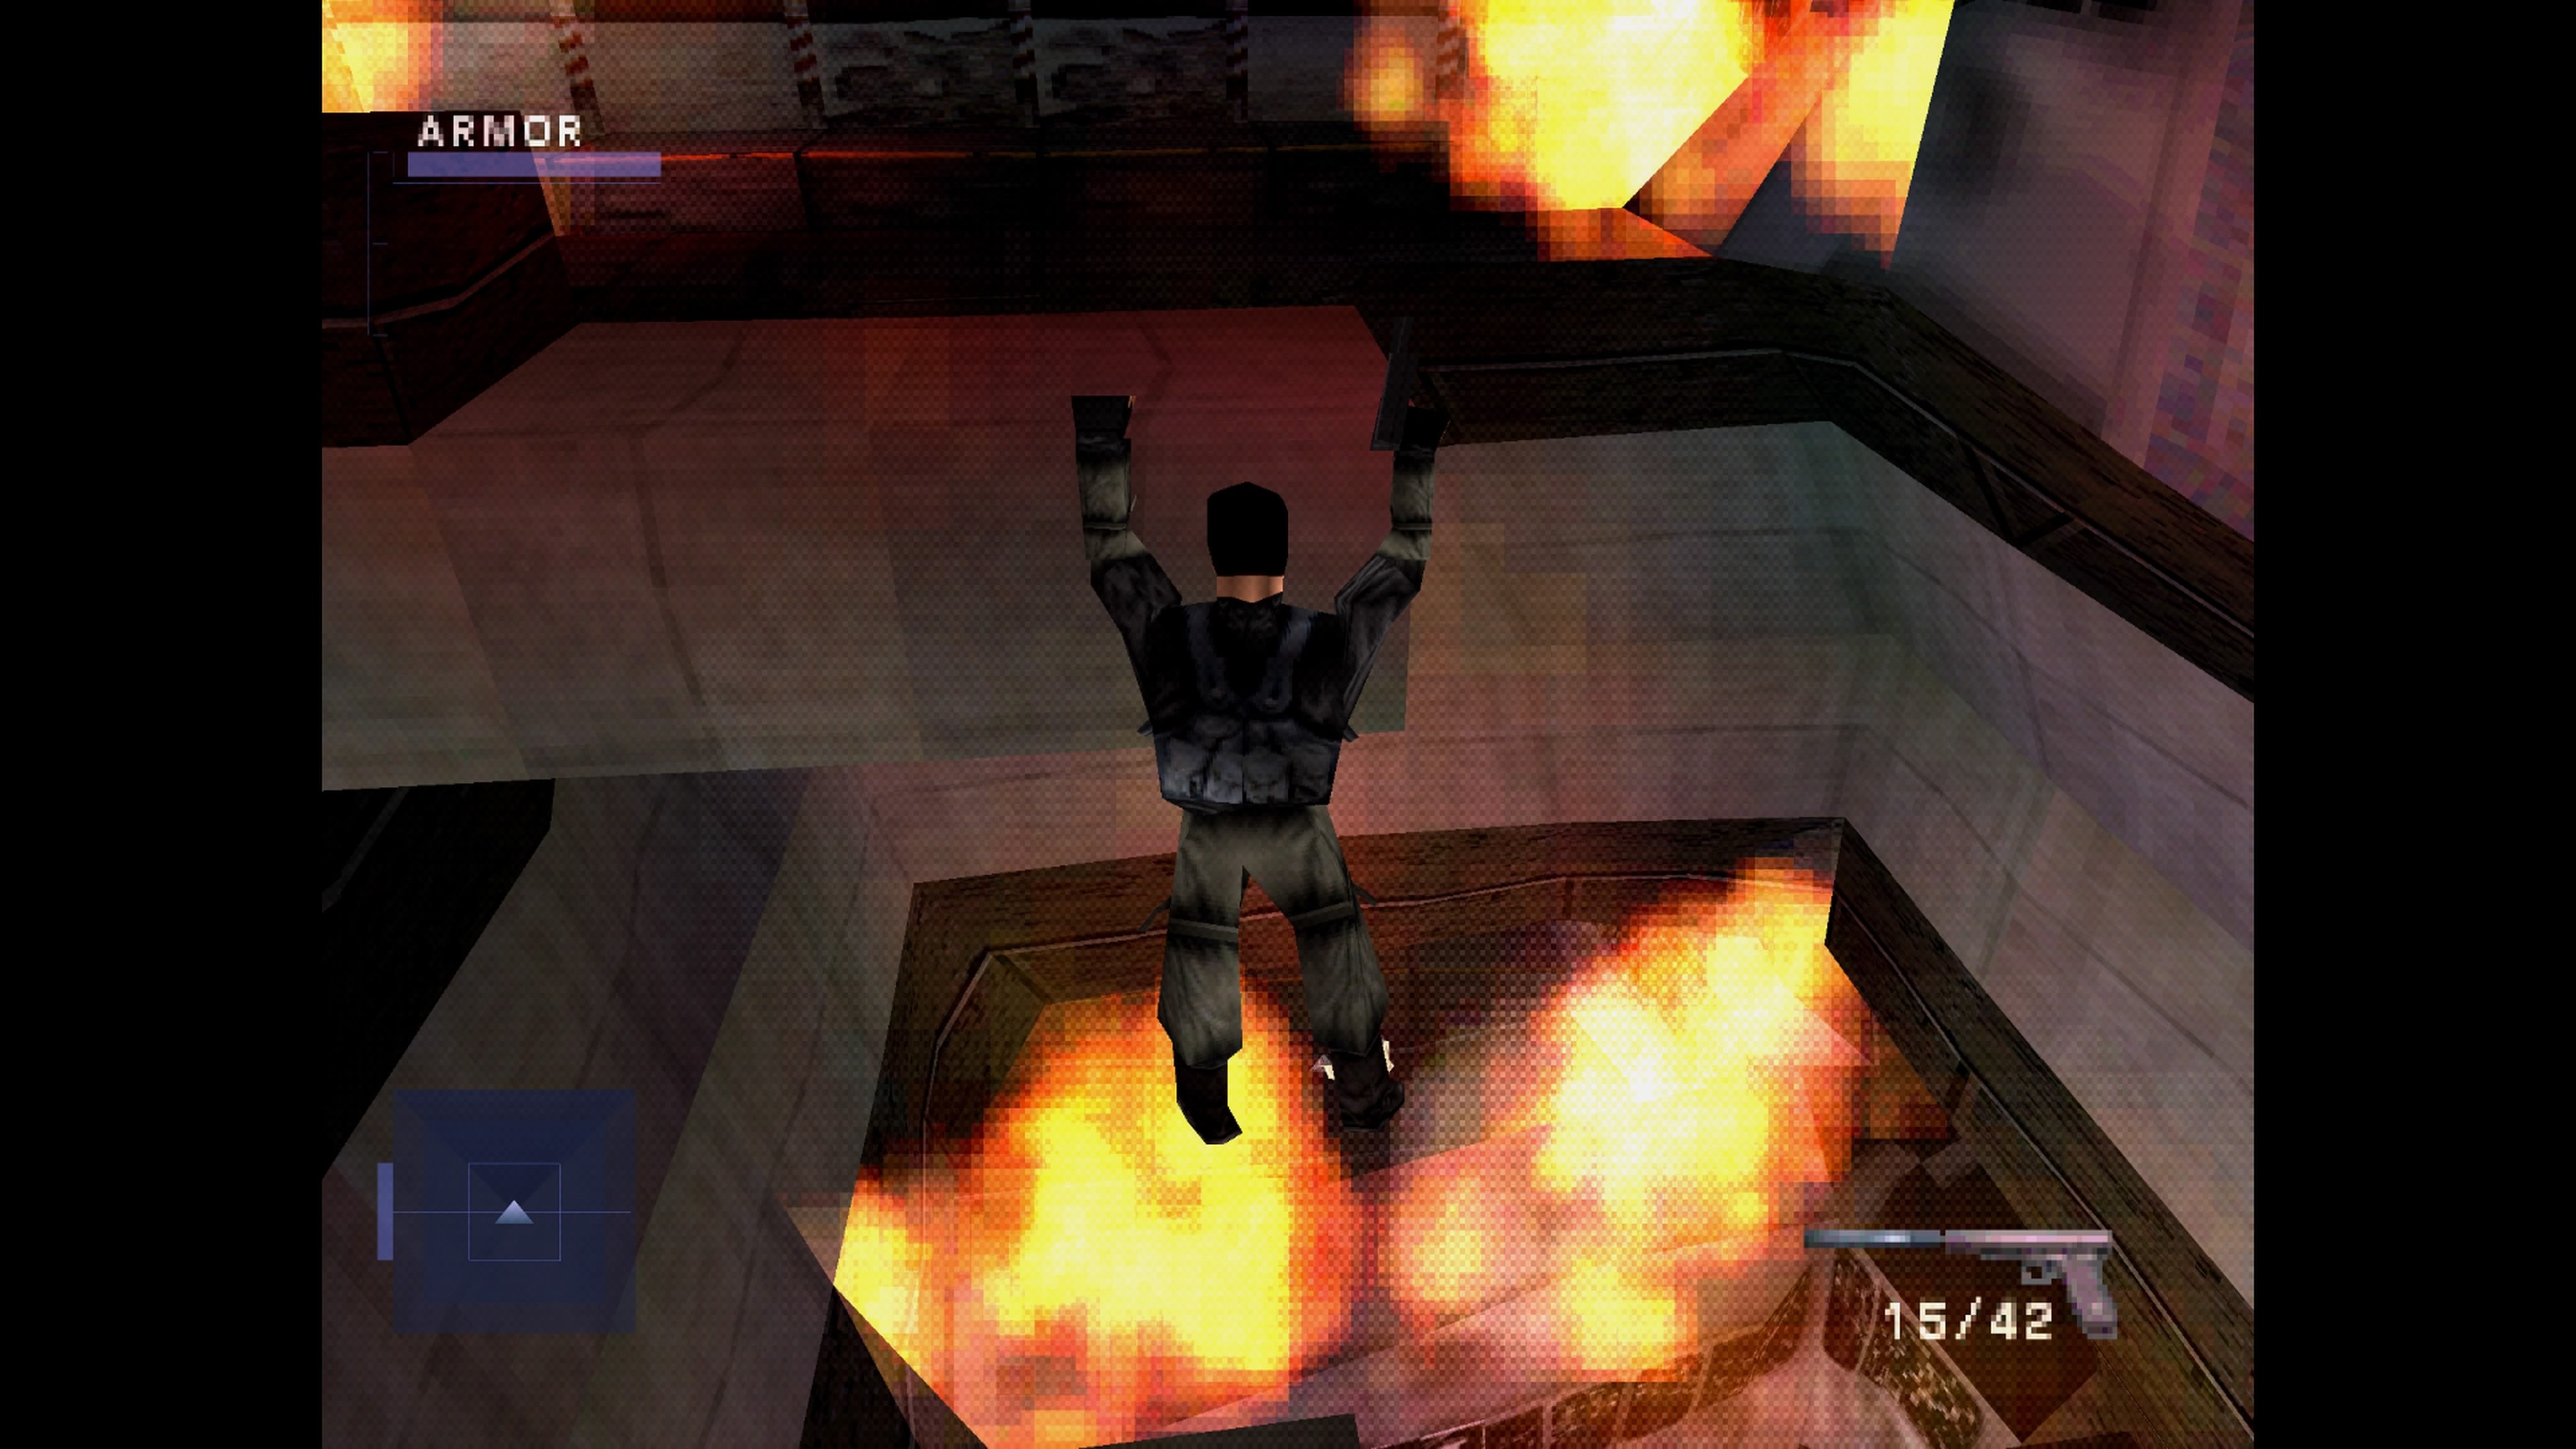 Syphon Filter from Spike - Playstation